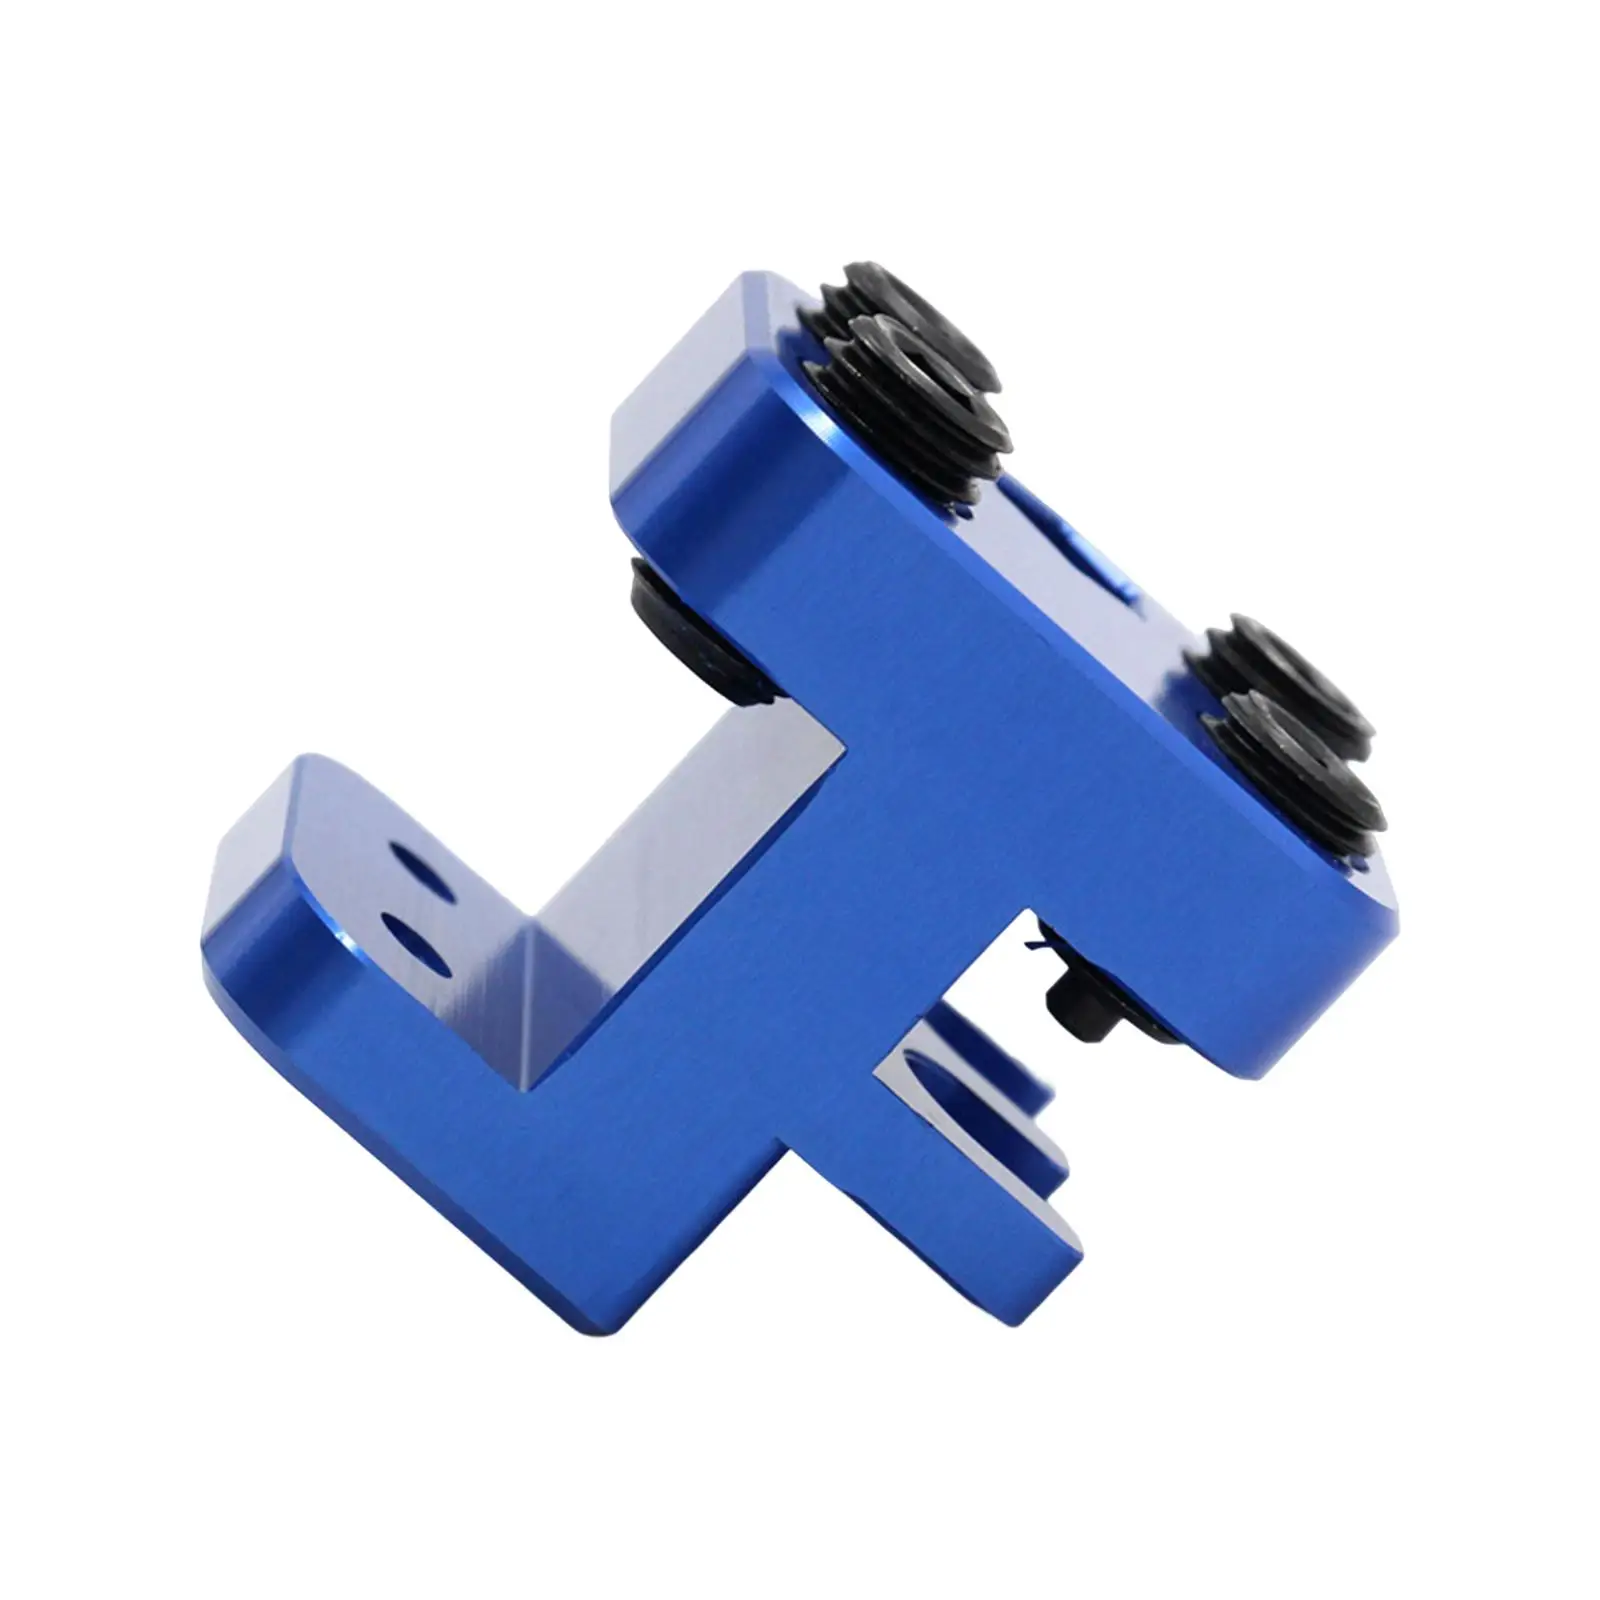 Master Link Press Tool Antirust Sturdy High Hardness 1Piece 08-0675O for 520 525 530 ATV Motorcycle Replace Accessories